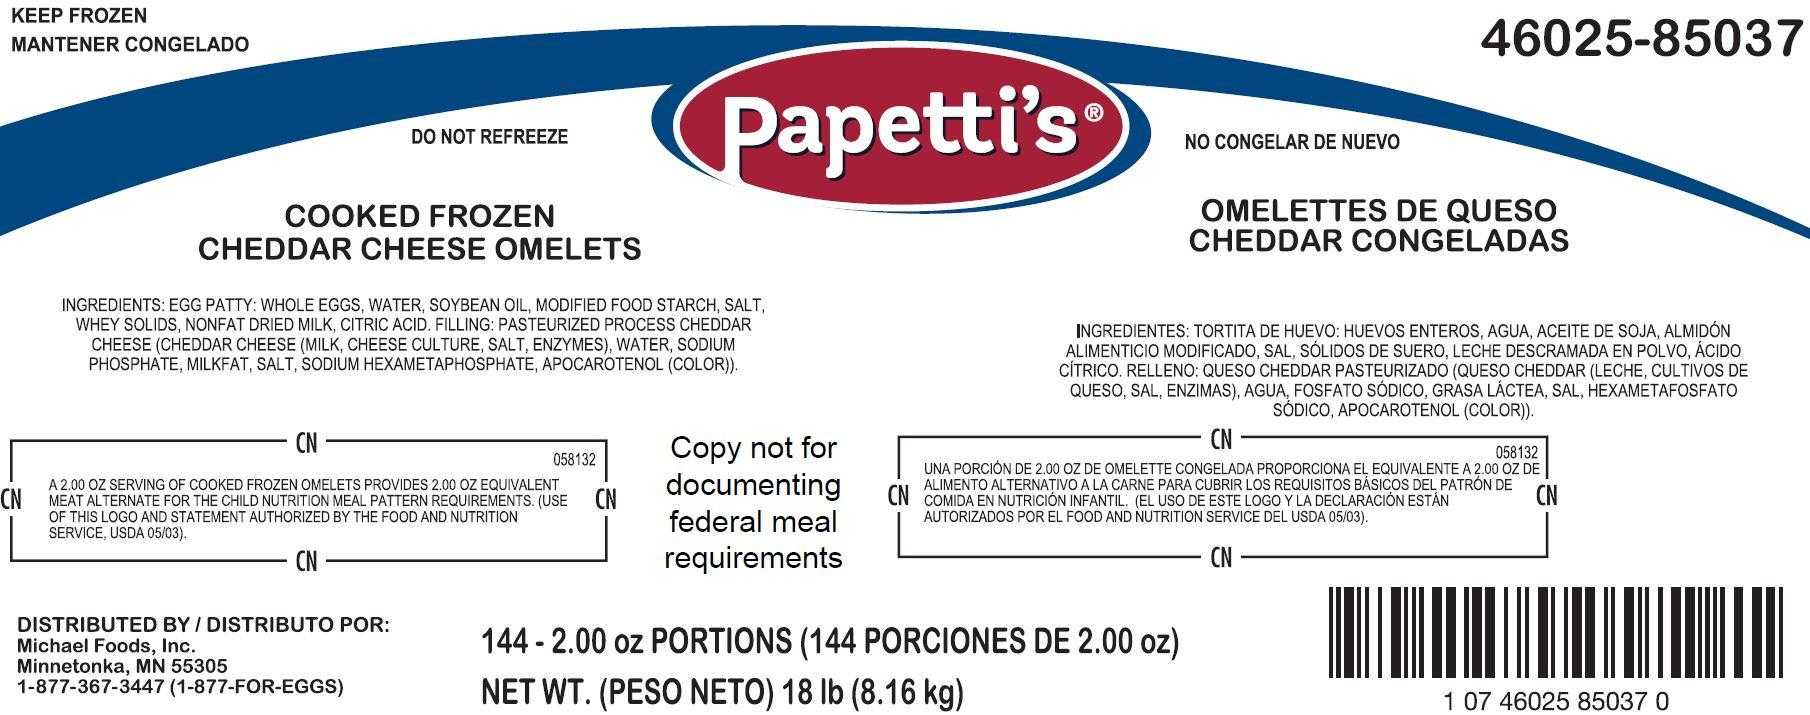 Papetti’s® Fully-Cooked 5″ x 2.25″ Singlefold Omelet Filled with Cheddar Cheese, CN, 144/2.0 oz CN Labeled PDF